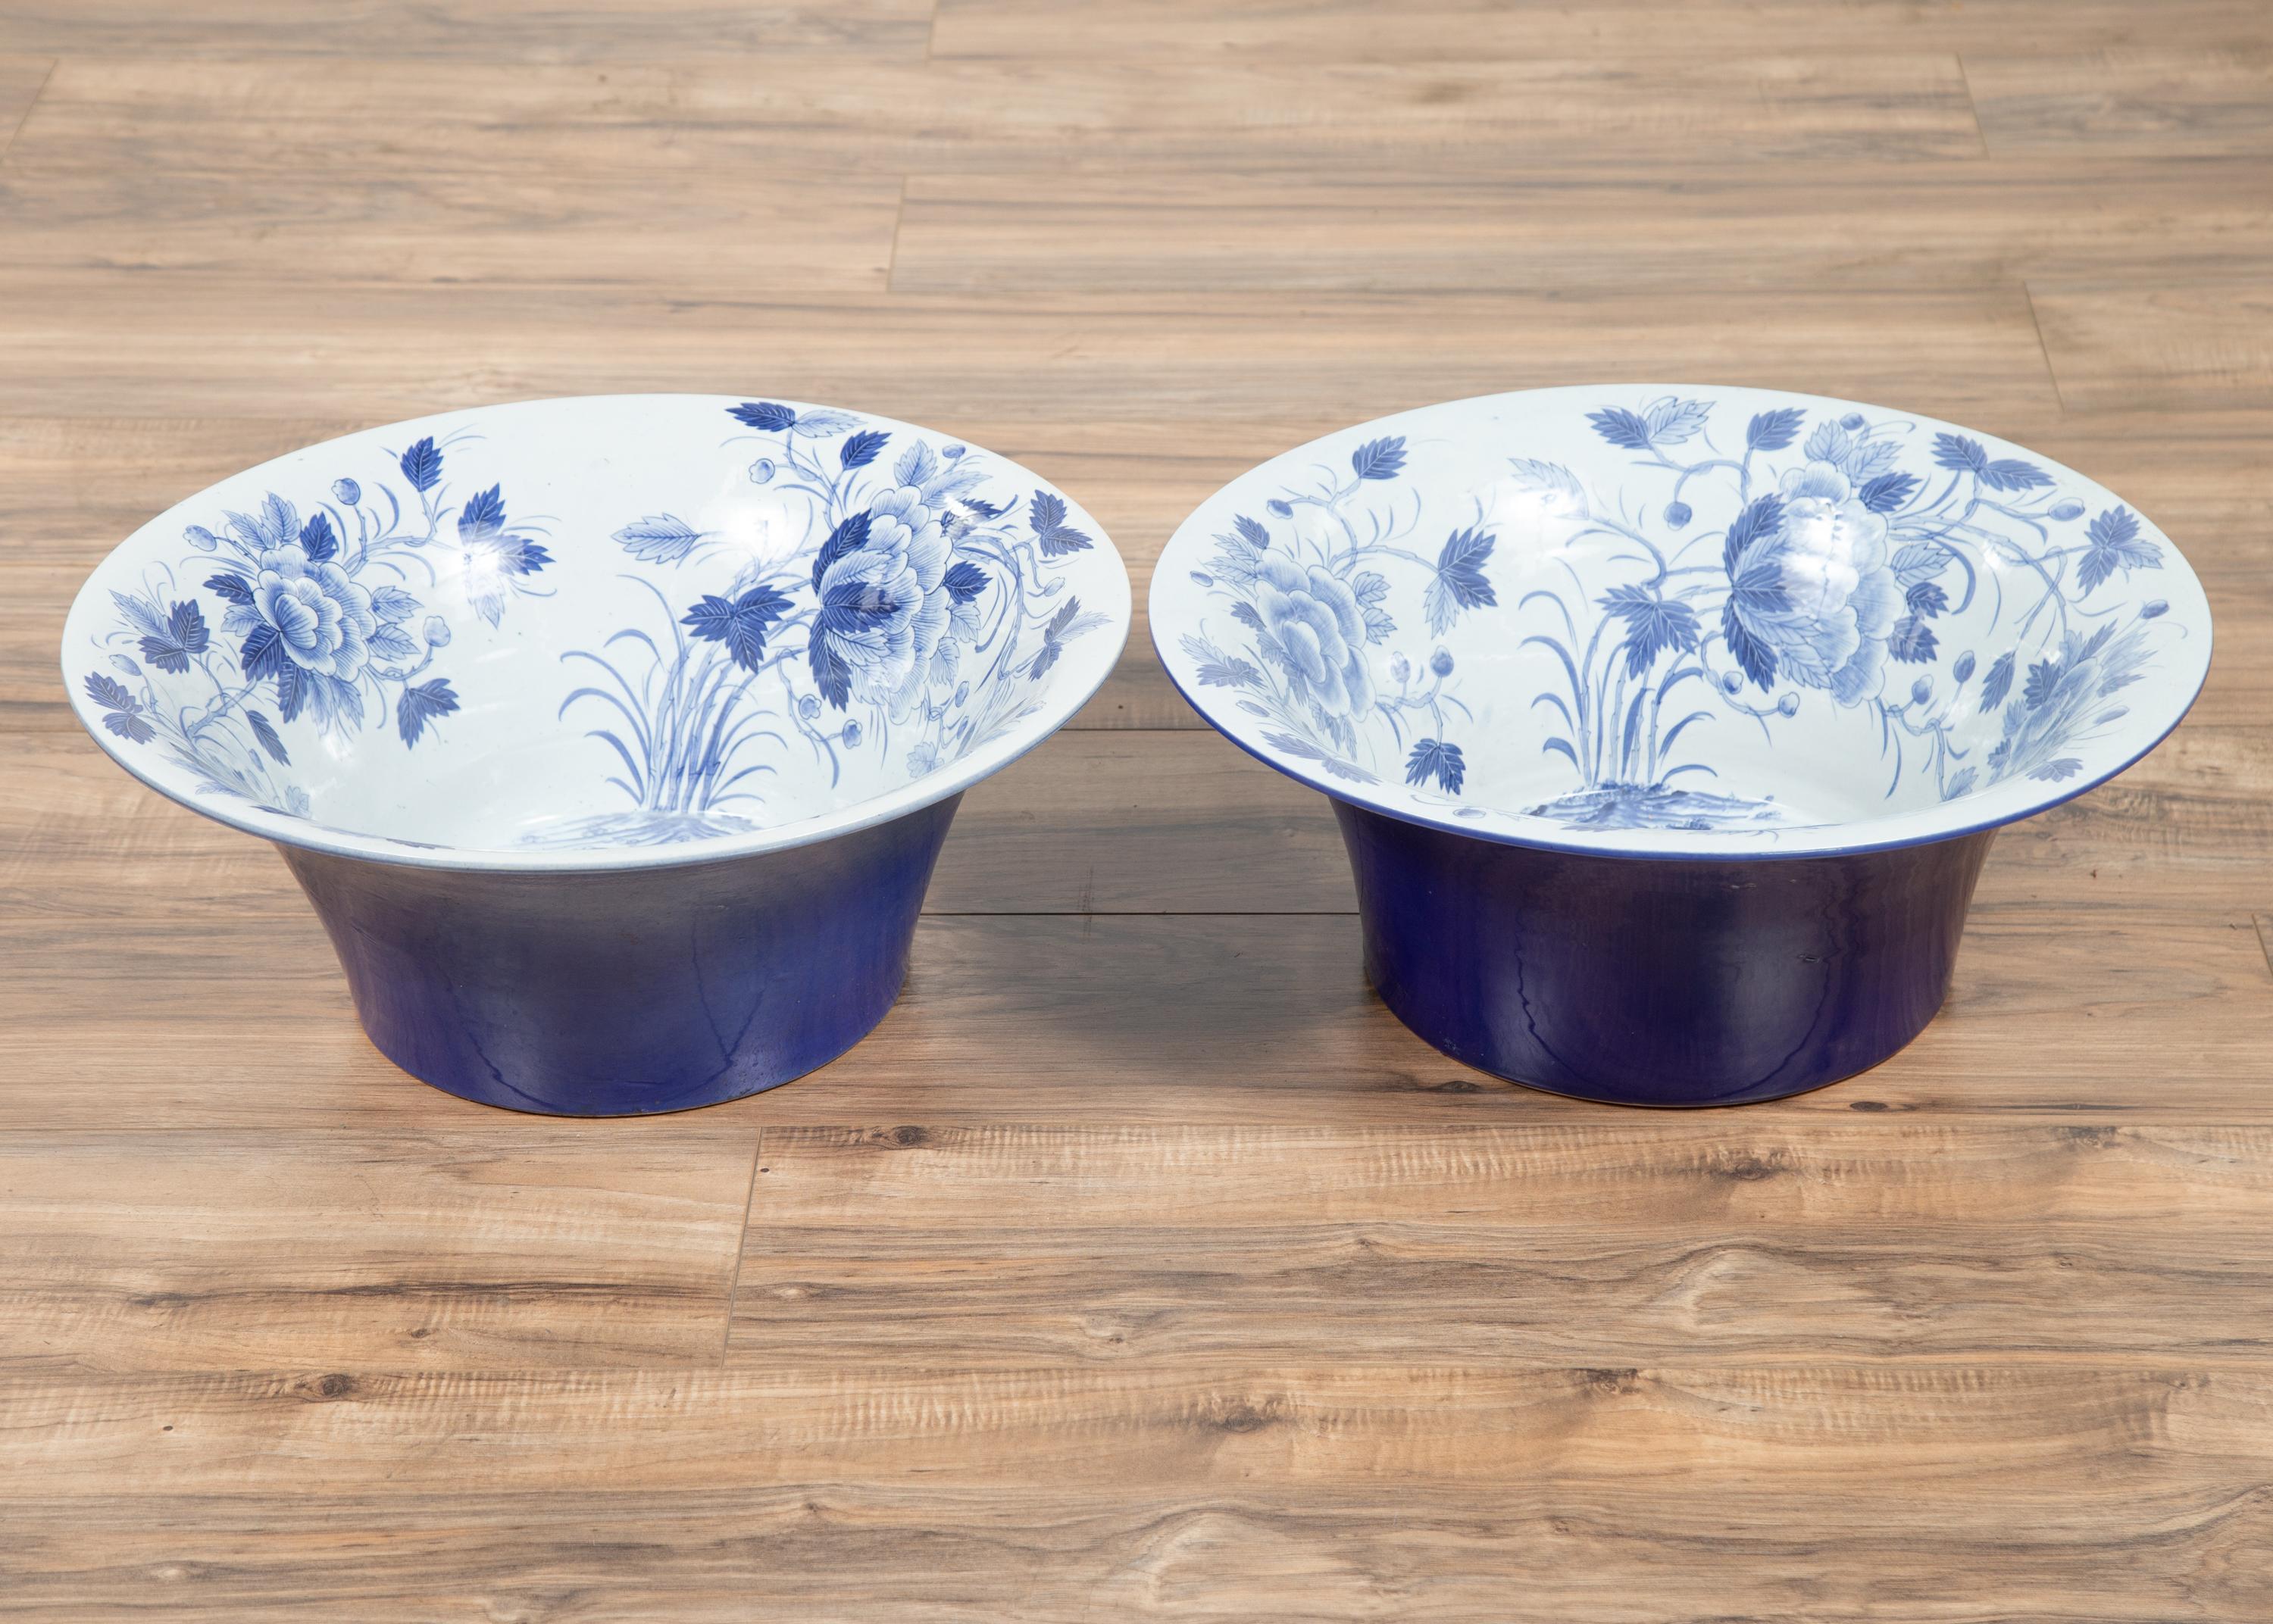 Blue and White Porcelain Wash Basin with Cobalt Blue Patina and Floral Motifs For Sale 4